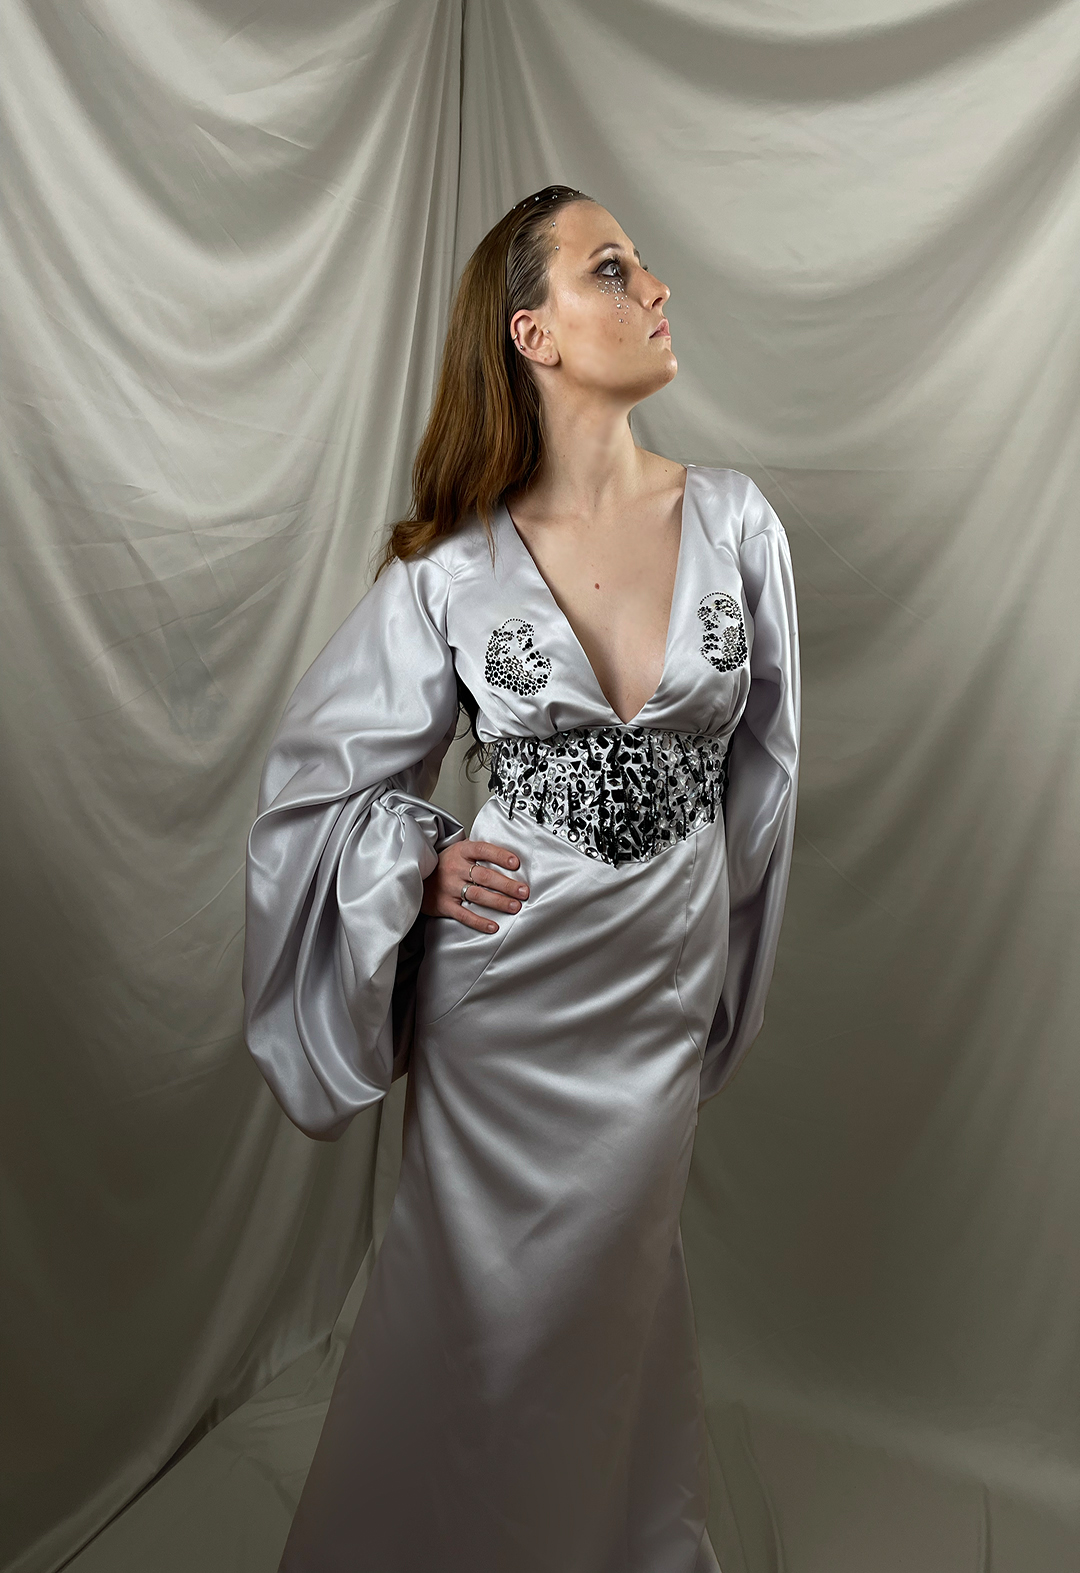 A model wearing a dress made in duchess satin, with rhinestones of different sizes and crystal of mixed shapes. The model has one hand on her waist and is looking to the side. The background has champagne colored silk drapes. 